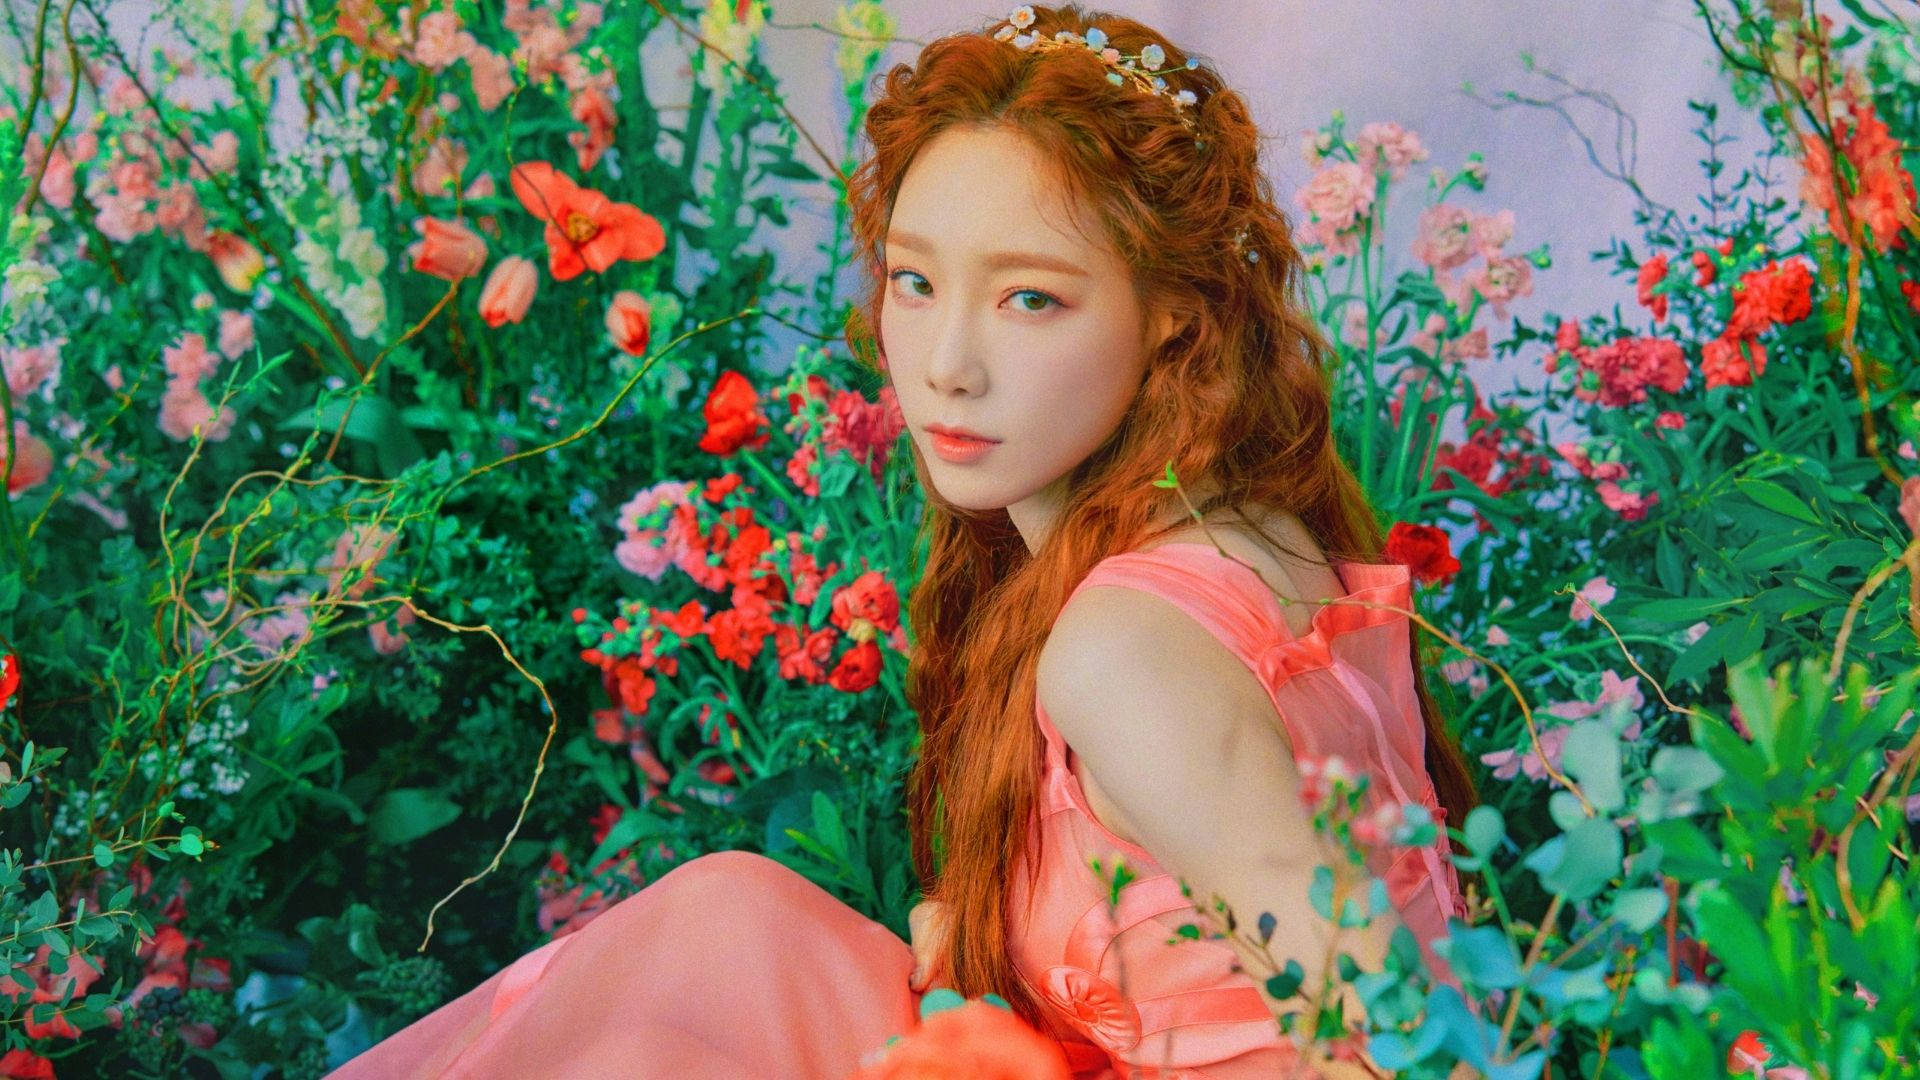 Taeyeon With Flowers Wallpaper